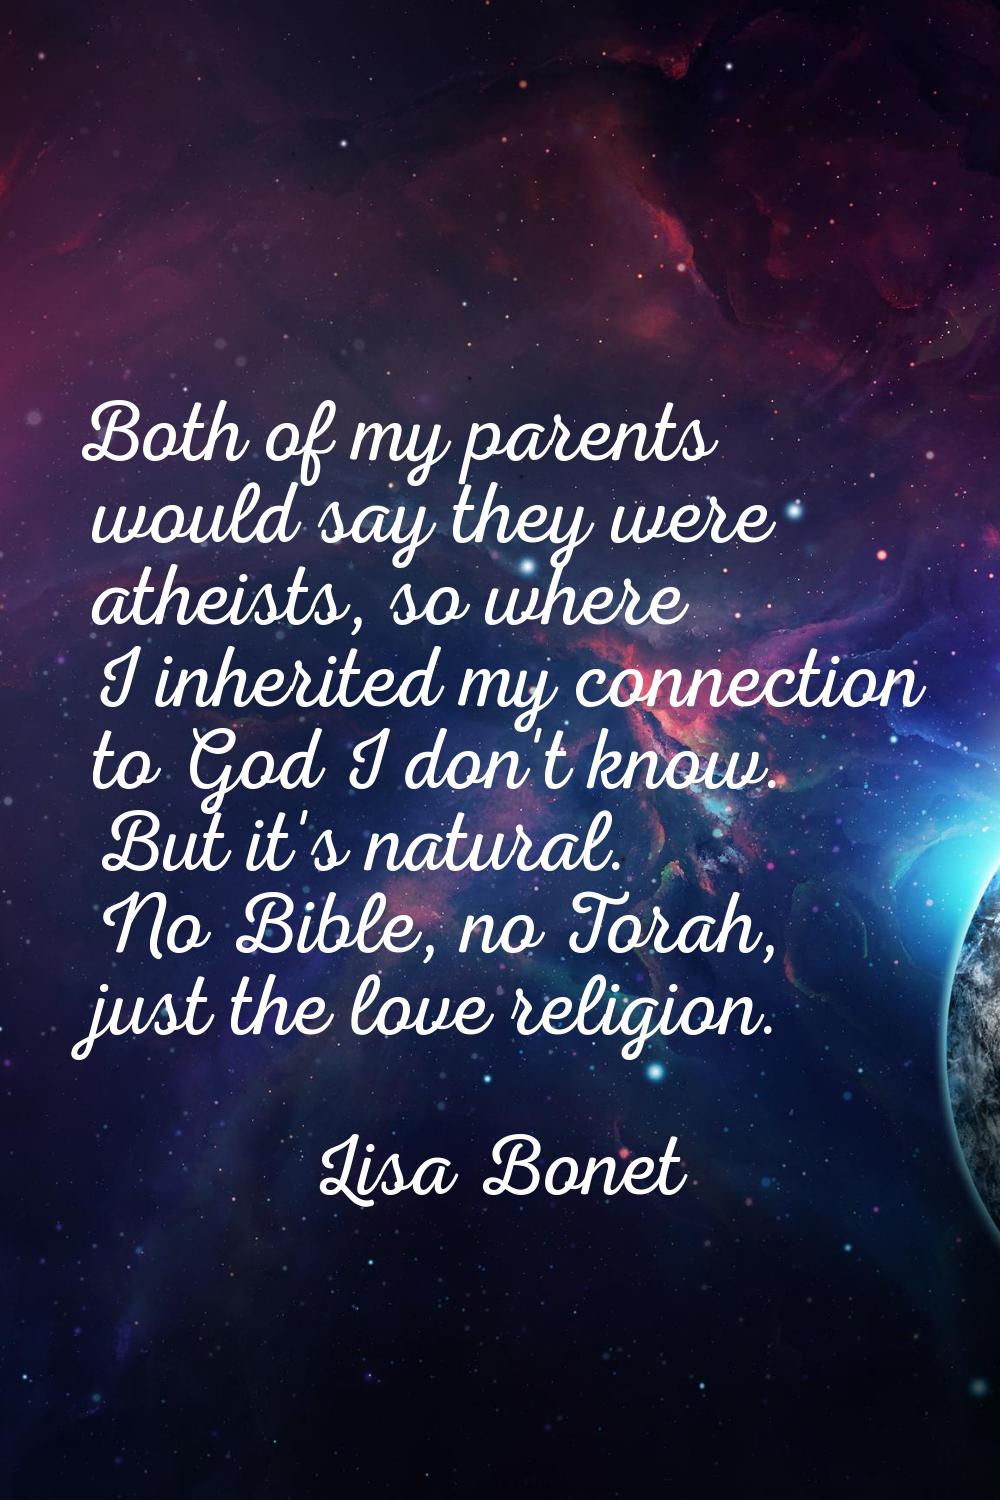 Both of my parents would say they were atheists, so where I inherited my connection to God I don't 